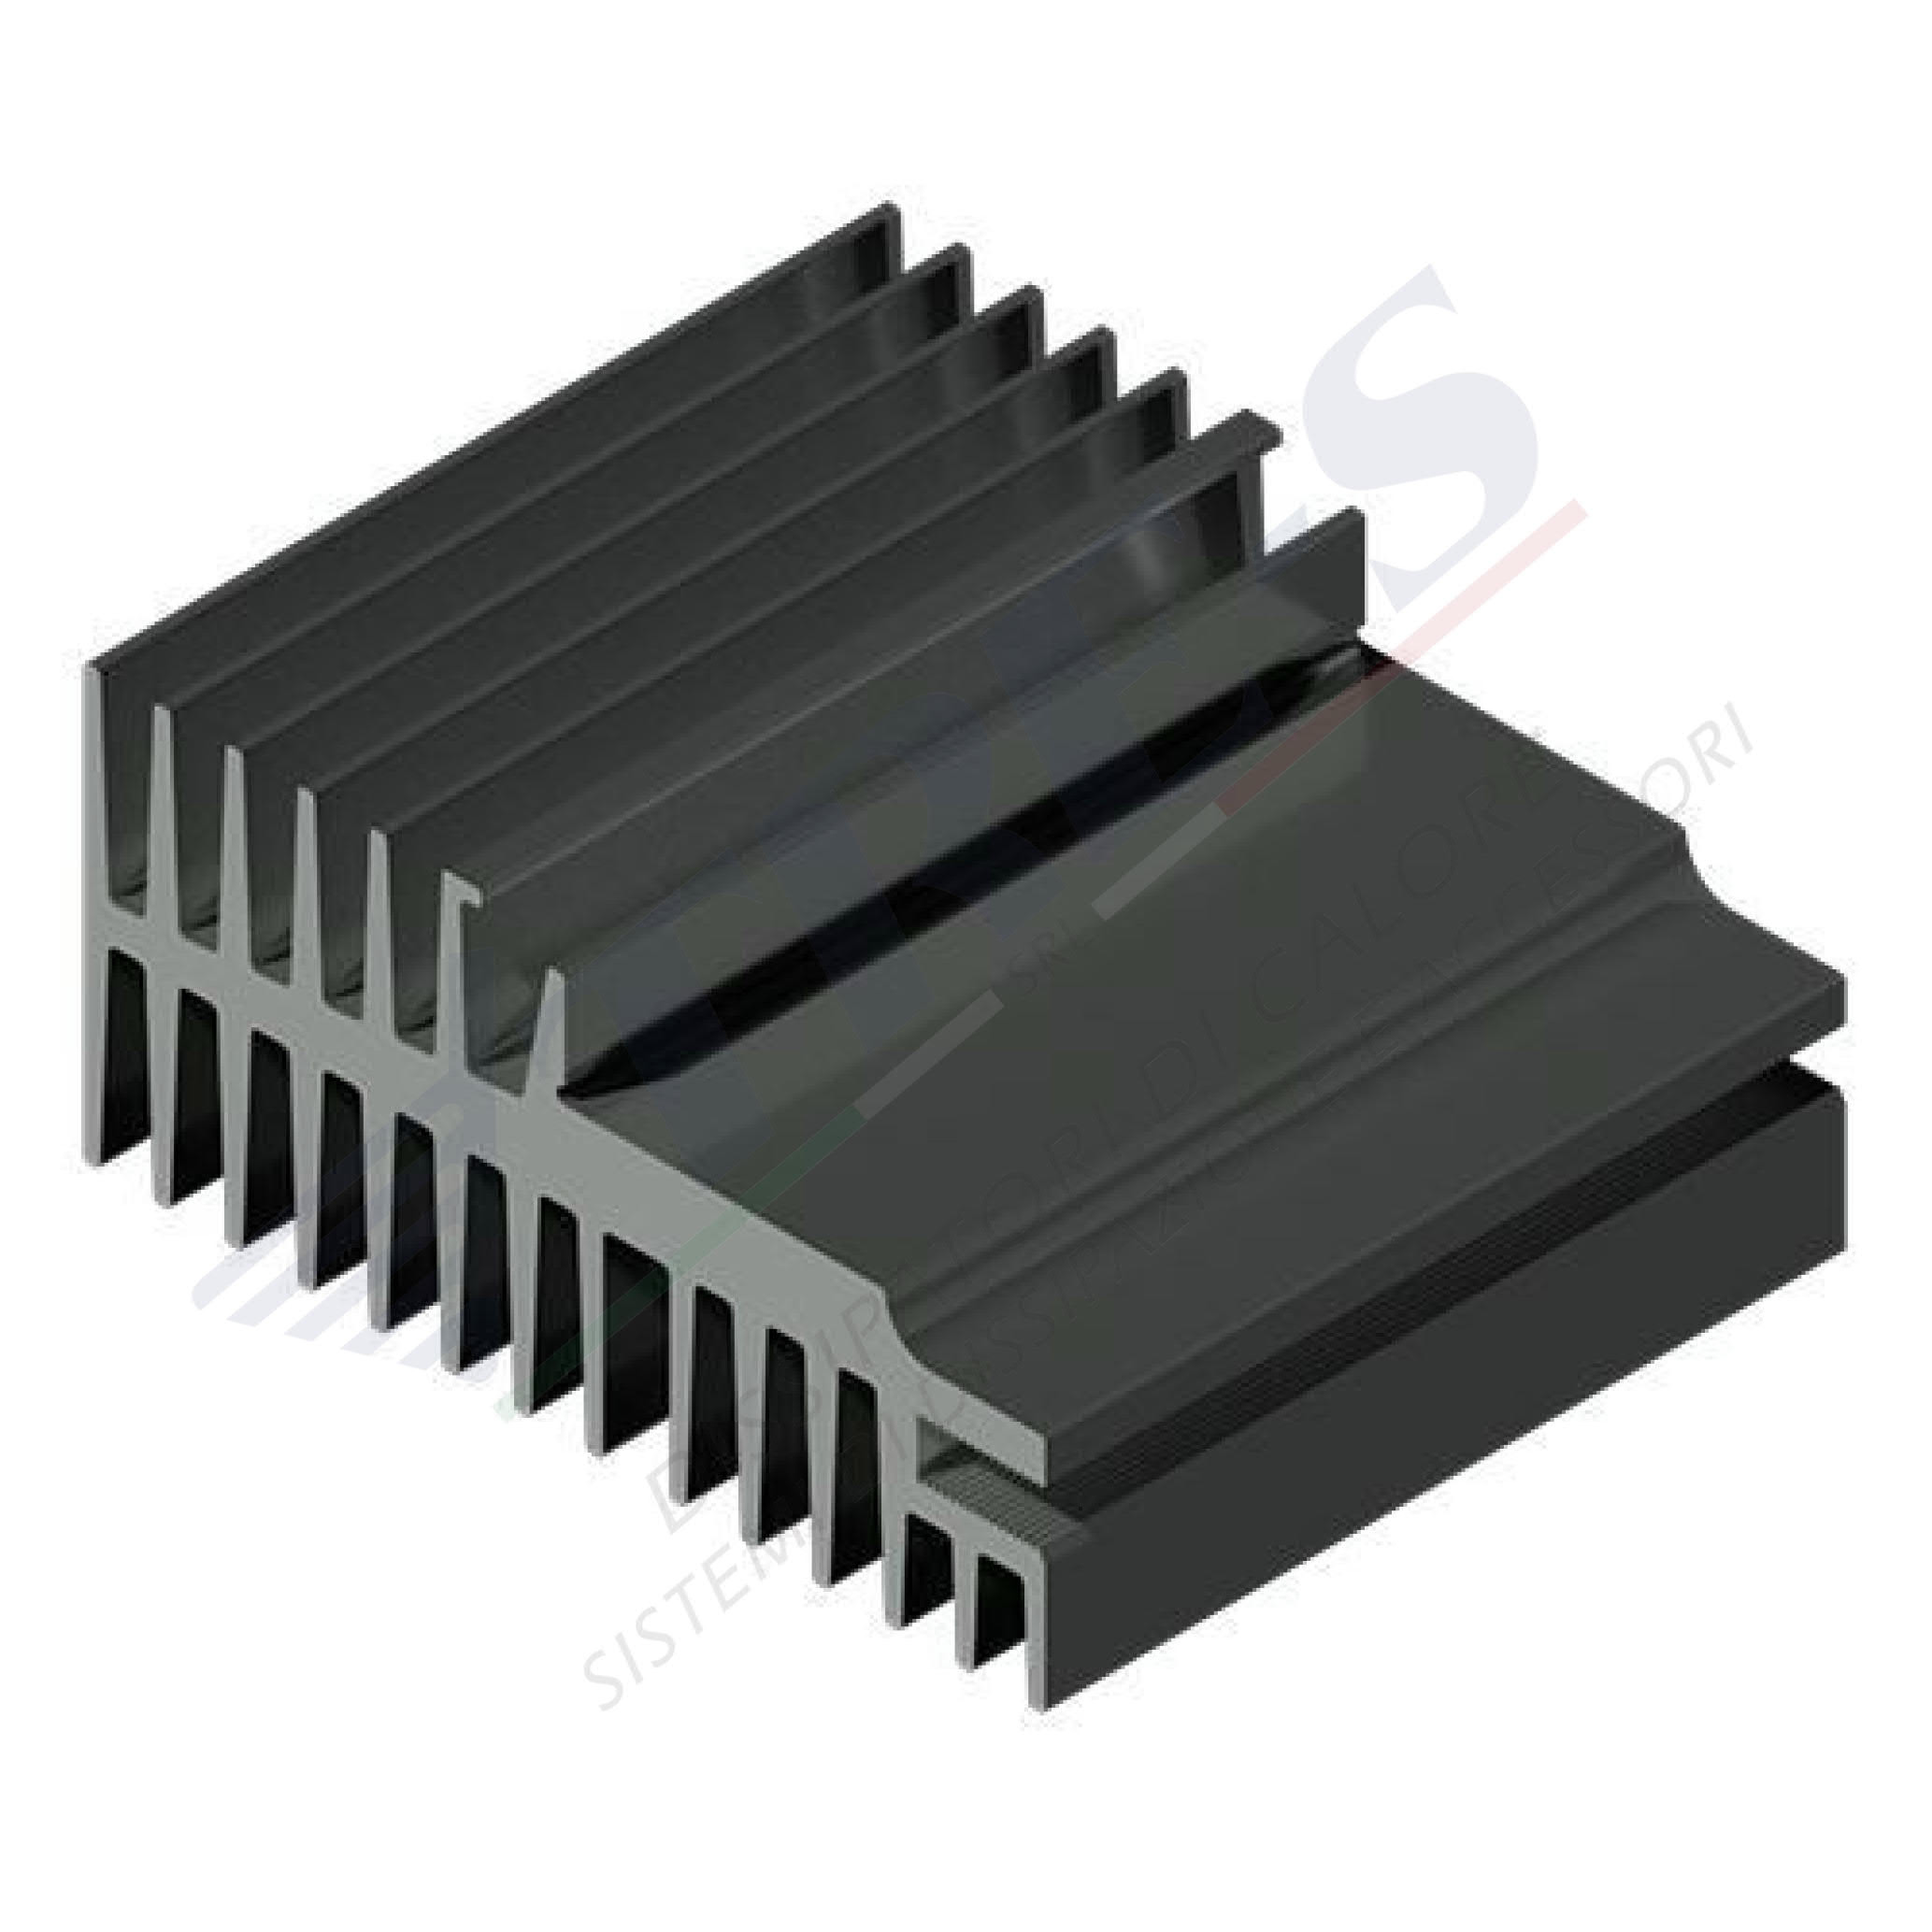 PRO1273 - Heat sinks with clip system